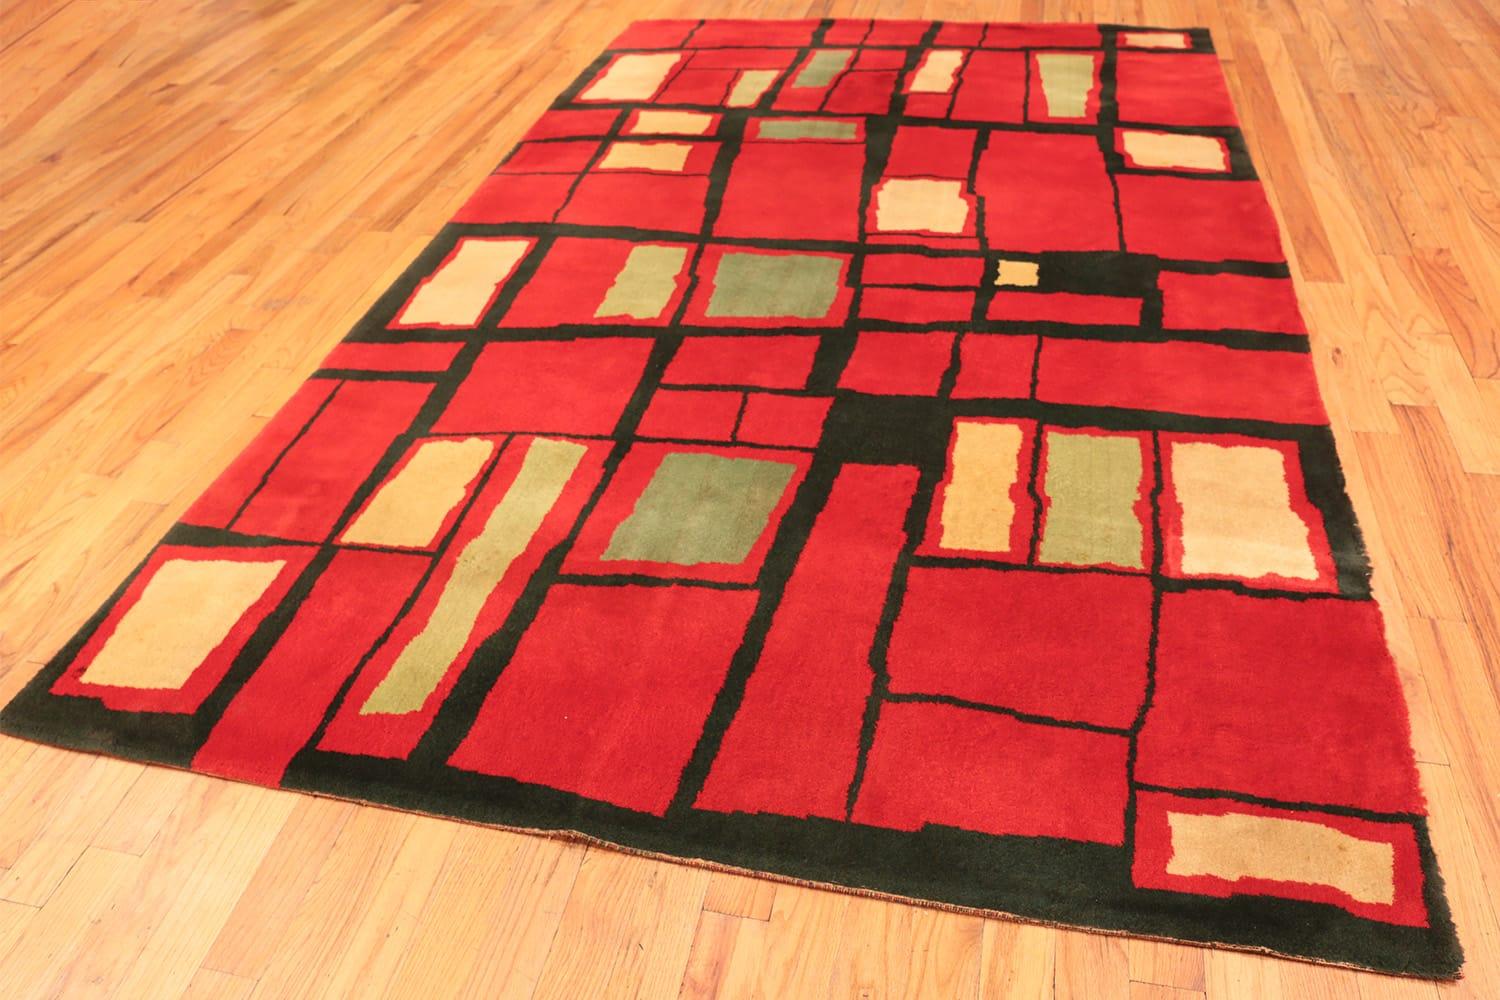 Vintage Art Deco rug, Origin Country: England, circa early 20th century. Size: 6 ft 7 in x 10 ft 2 in (2.01 m x 3.1 m)

This unabashedly modern vintage rug captures the zeitgeist of the art deco movement, which grabbed the world’s attention in the